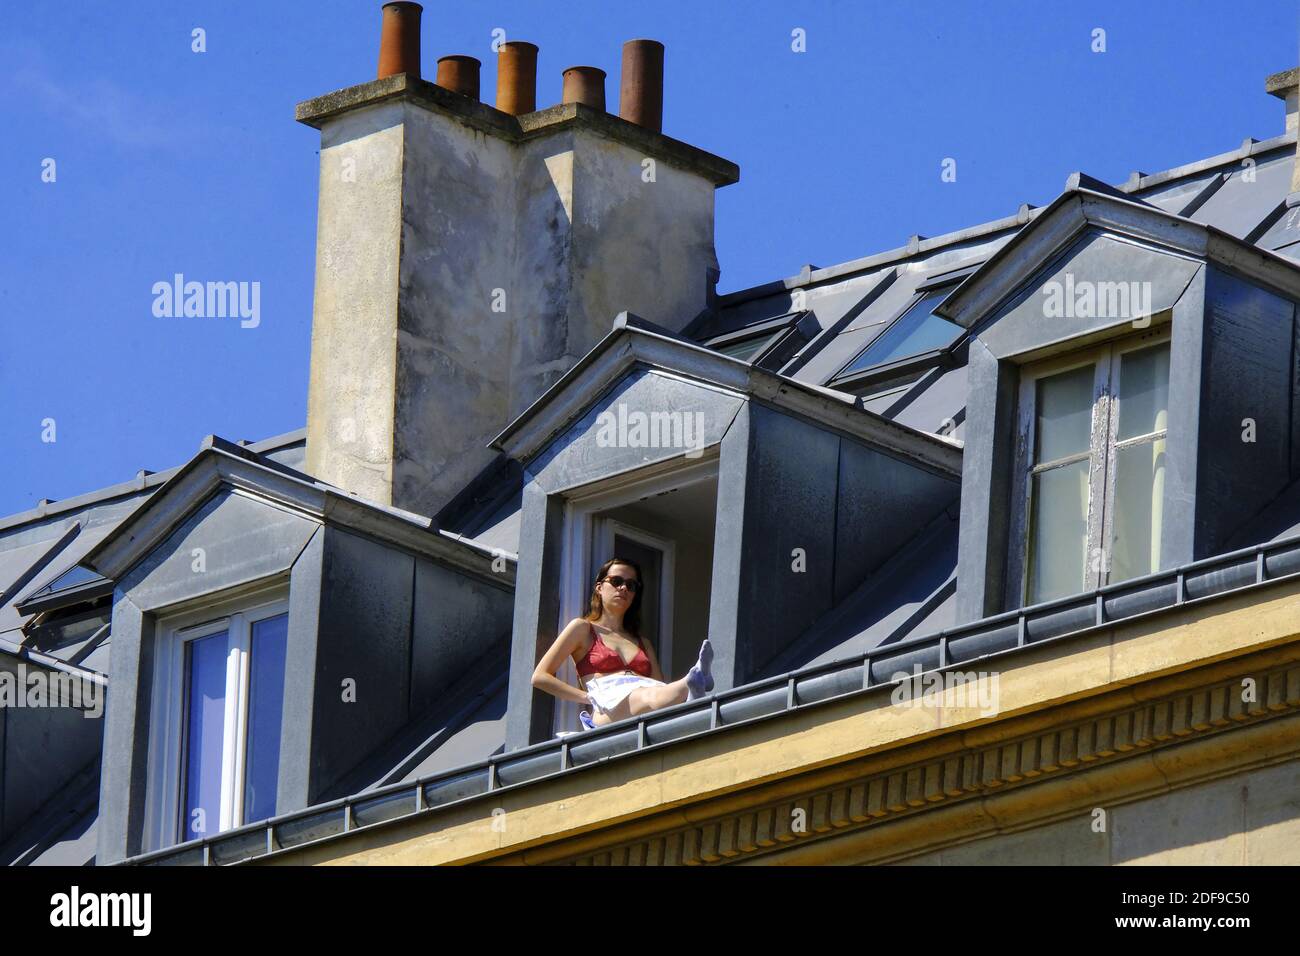 A confined Parisian enjoy sunny spring weather on the window during lockdown imposed to slow the spreading of the coronavirus disease (COVID-19) in Paris. after the announcement by French President Emmanuel Macron of the strict home confinement rules of the French due to an outbreak of coronavirus pandemic (COVID-19) on March 18, 2020 in Paris, France. the French will have to stay at home, France has closed down all schools, theatres, cinemas and a range of shops, with only those selling food and other essential items allowed to remain open. under penalty of sanctions, prohibiting all but esse Stock Photo